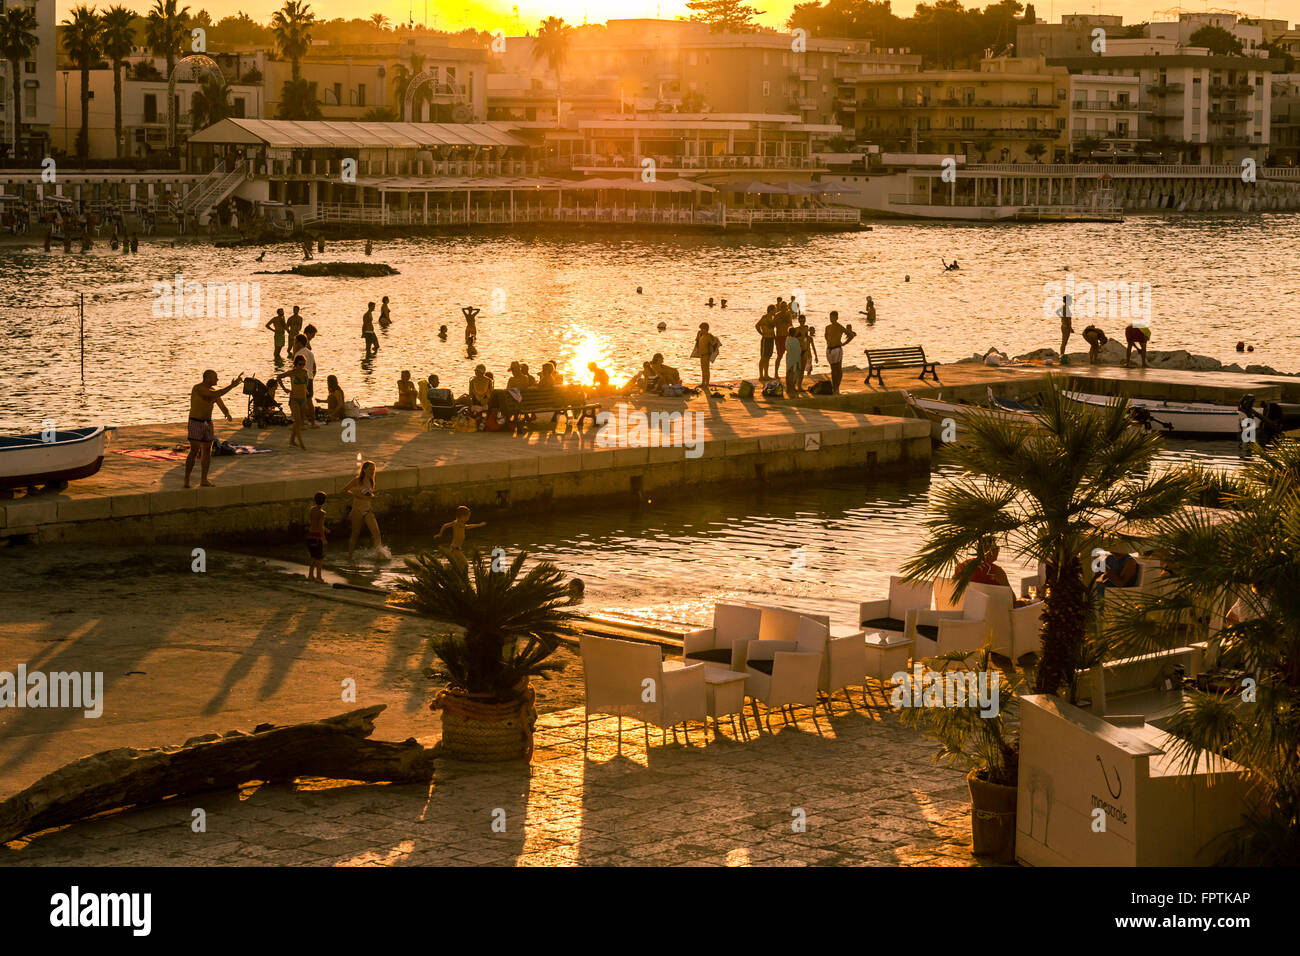 Otranto, Italy - Monday 11, 2014: Sunset on the seafront at Otranto in southern Italy. Stock Photo